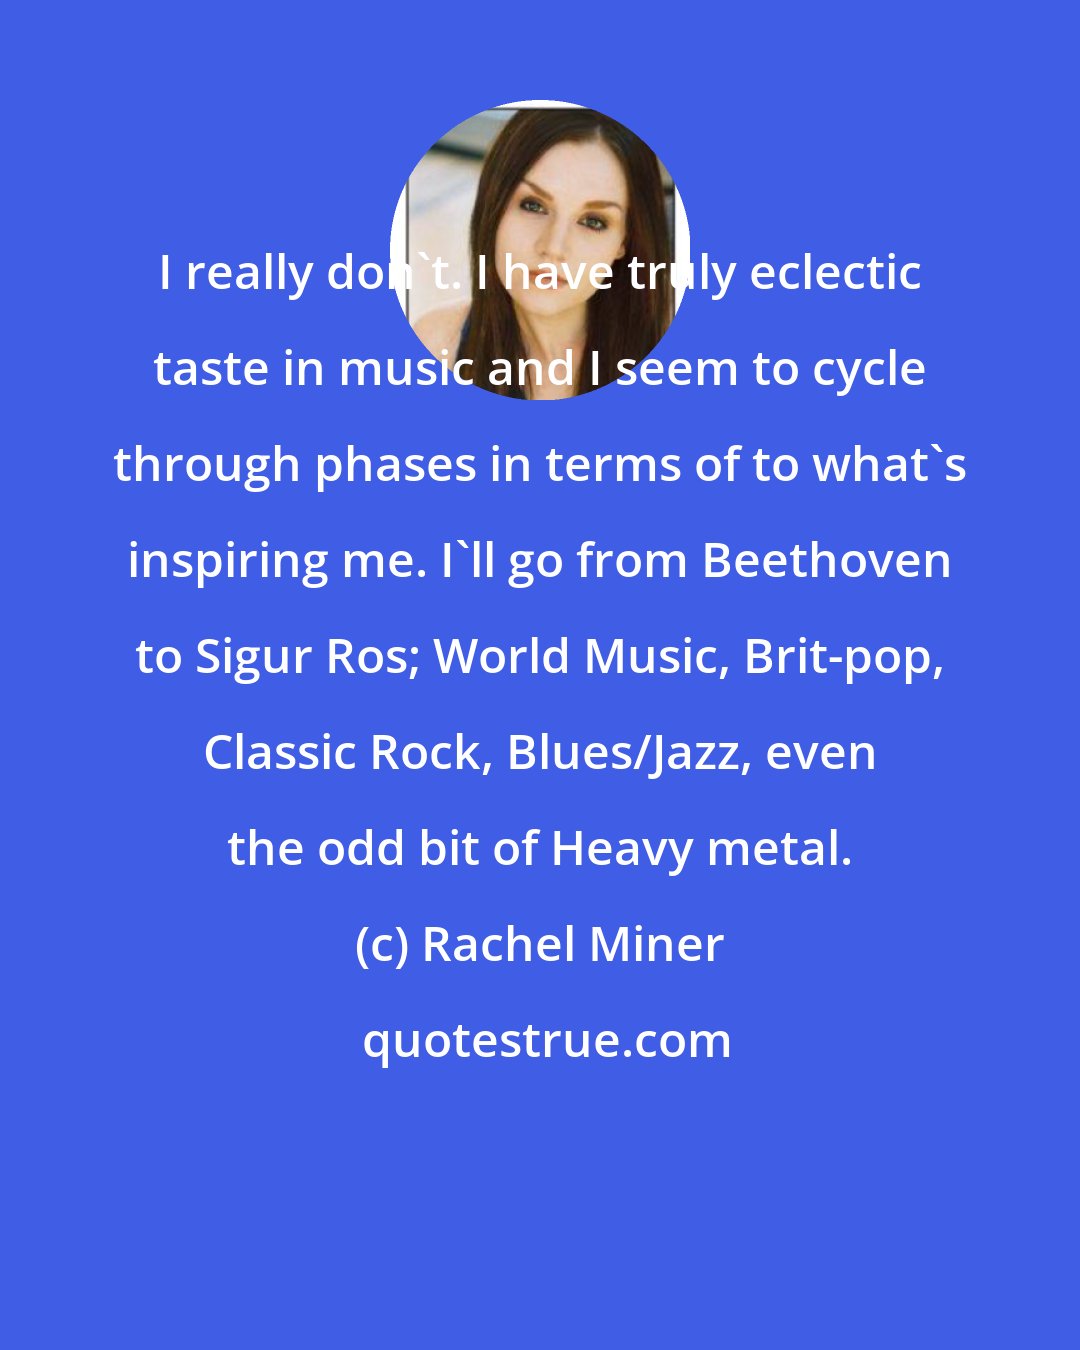 Rachel Miner: I really don't. I have truly eclectic taste in music and I seem to cycle through phases in terms of to what's inspiring me. I'll go from Beethoven to Sigur Ros; World Music, Brit-pop, Classic Rock, Blues/Jazz, even the odd bit of Heavy metal.